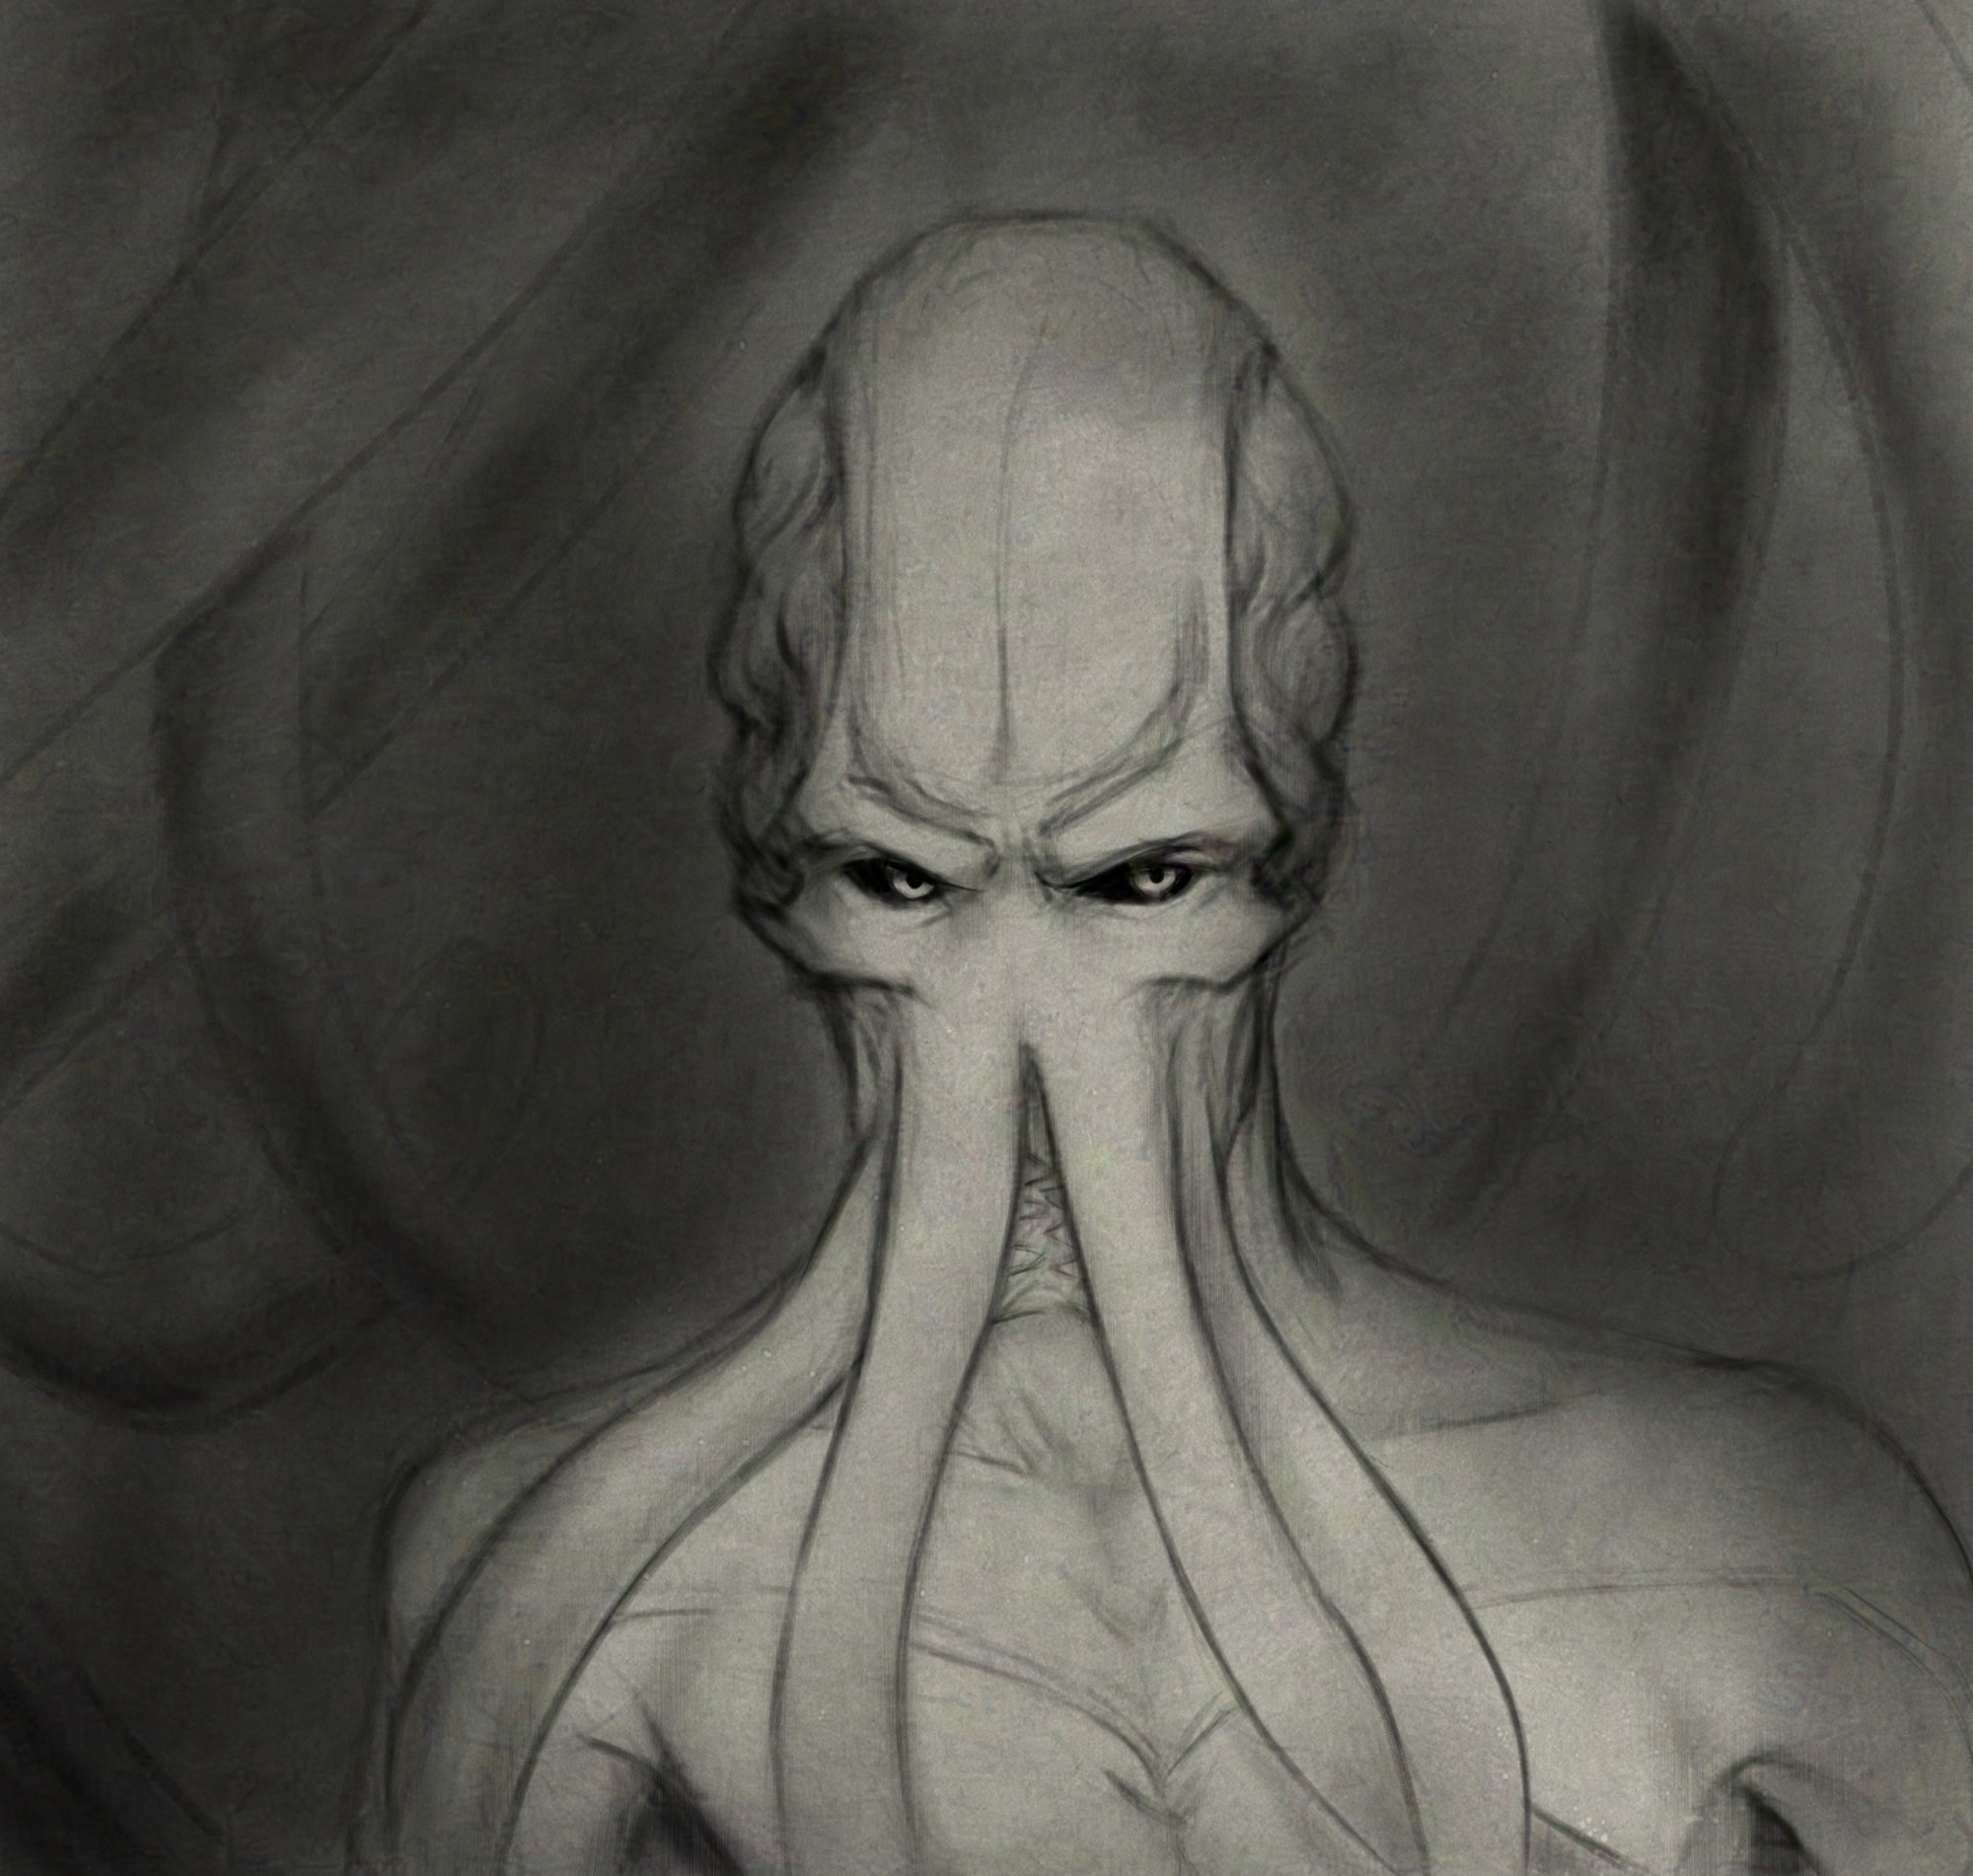 A soft shaded black and white drawing of the Emperor. He looks out from the dark with tentacles in the background.